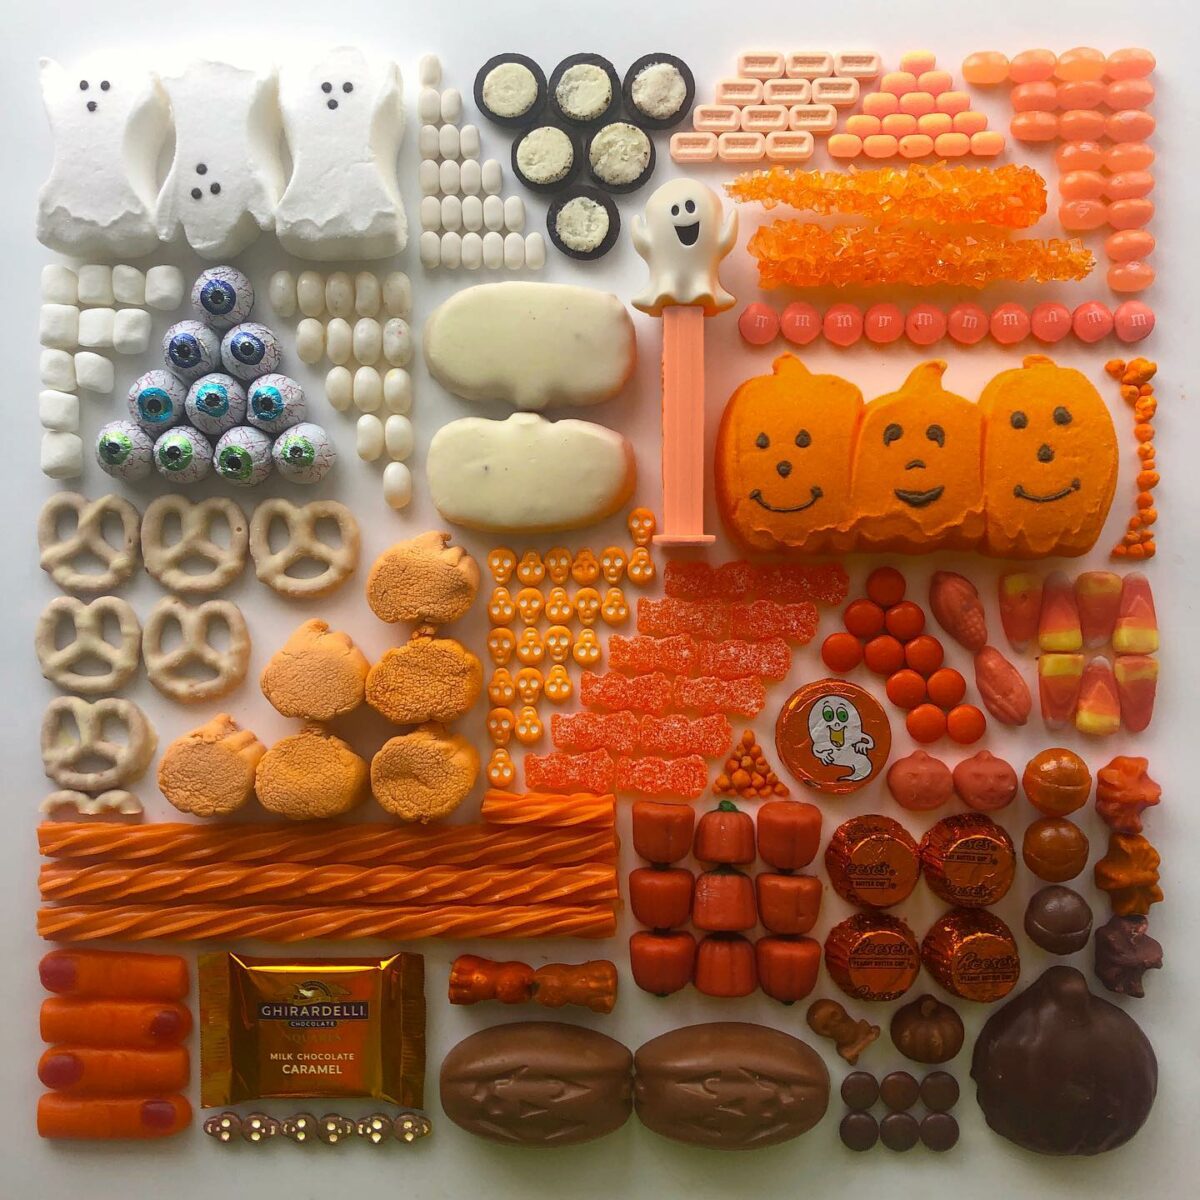 Hypnotizing Pattern Arrangements Of Food And Everyday Objects By Adam Hillman 22